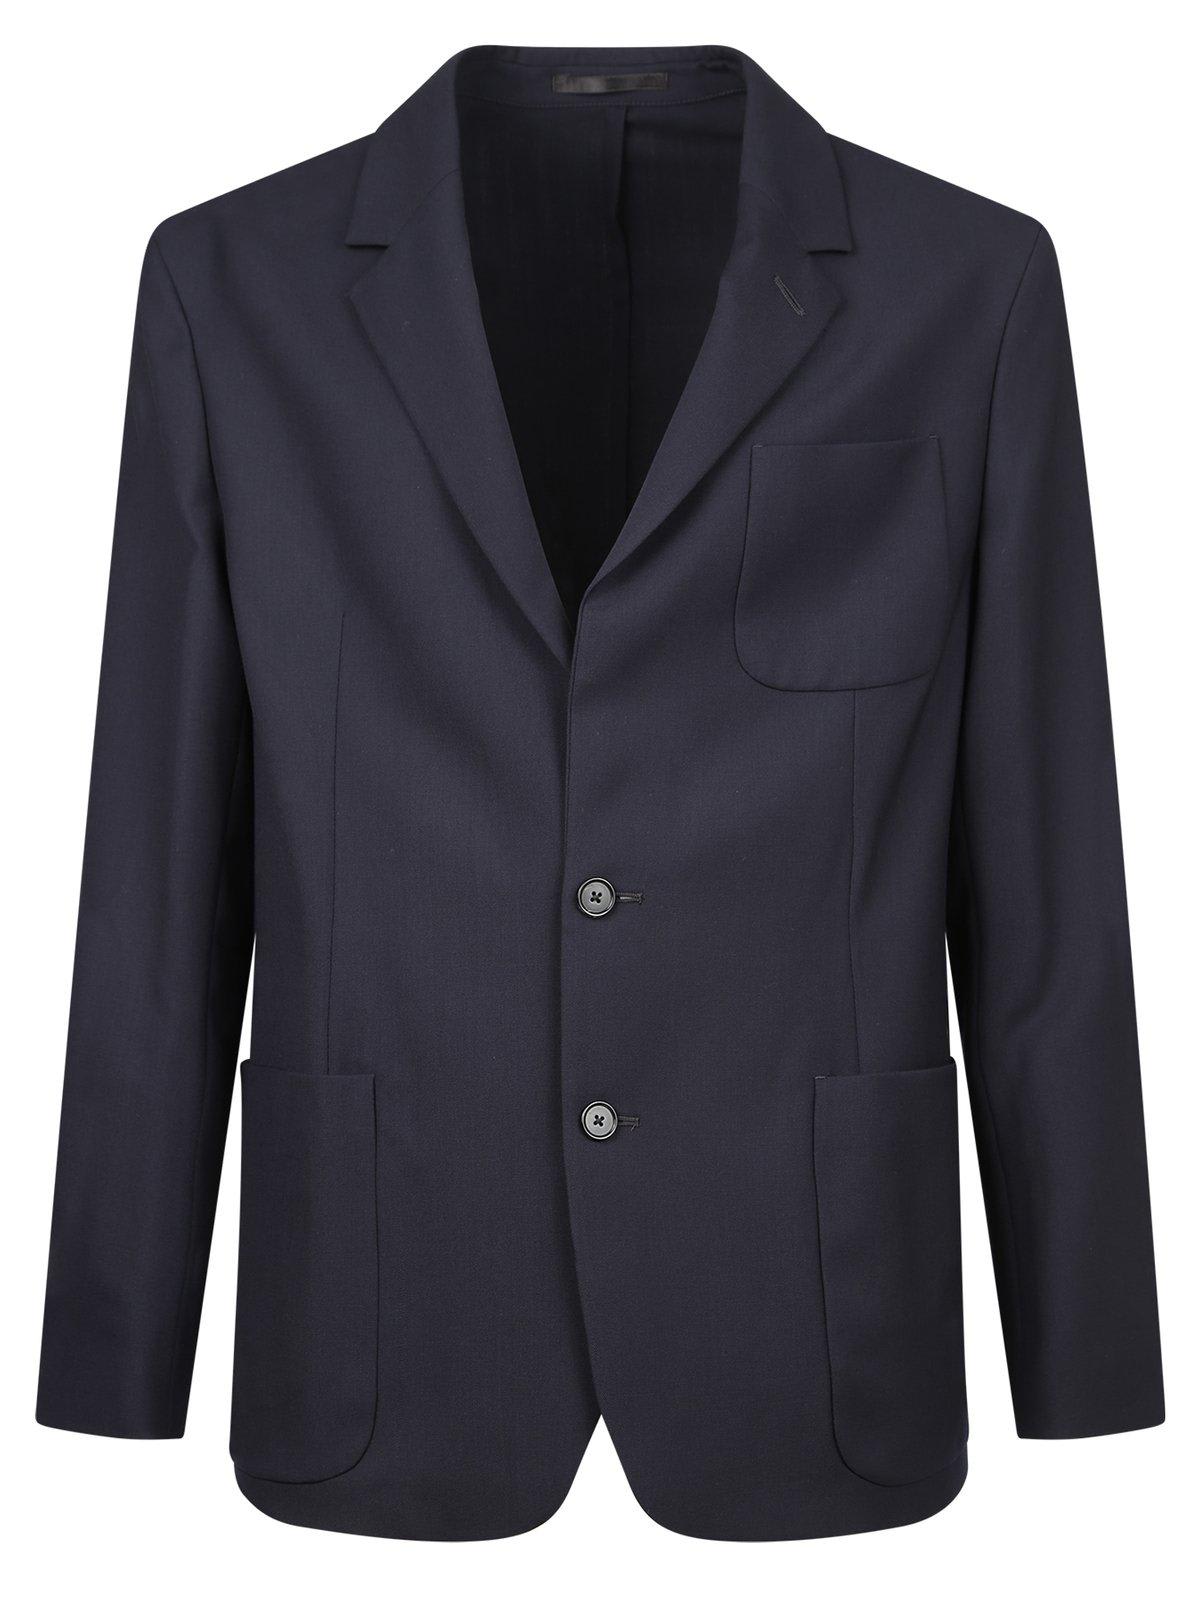 PAUL SMITH A SUIT TO TRAVEL IN UNLINED BLAZER